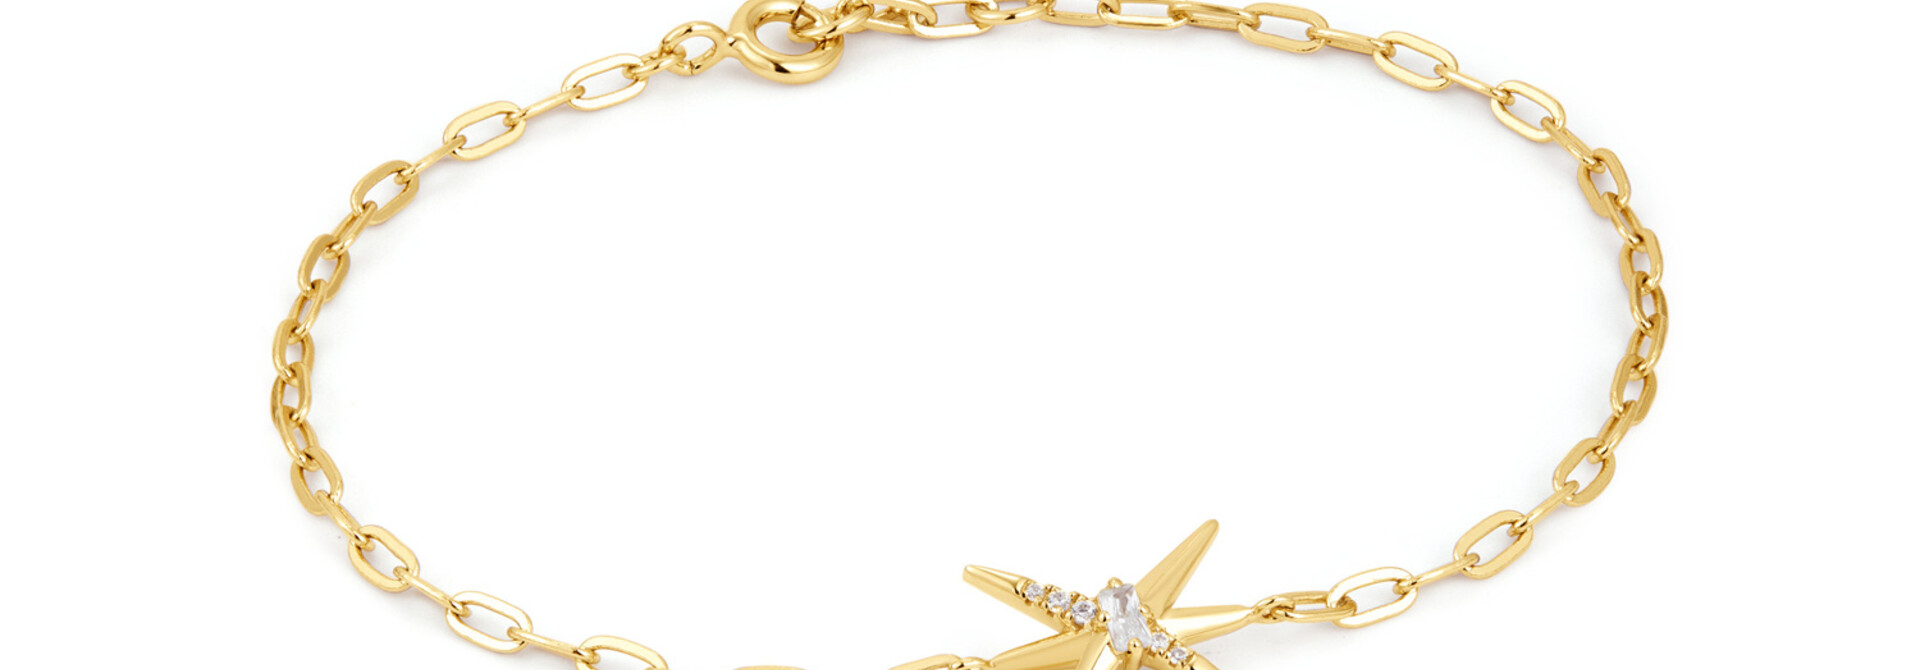 Gold Spike Chain Armband - Gold Plated